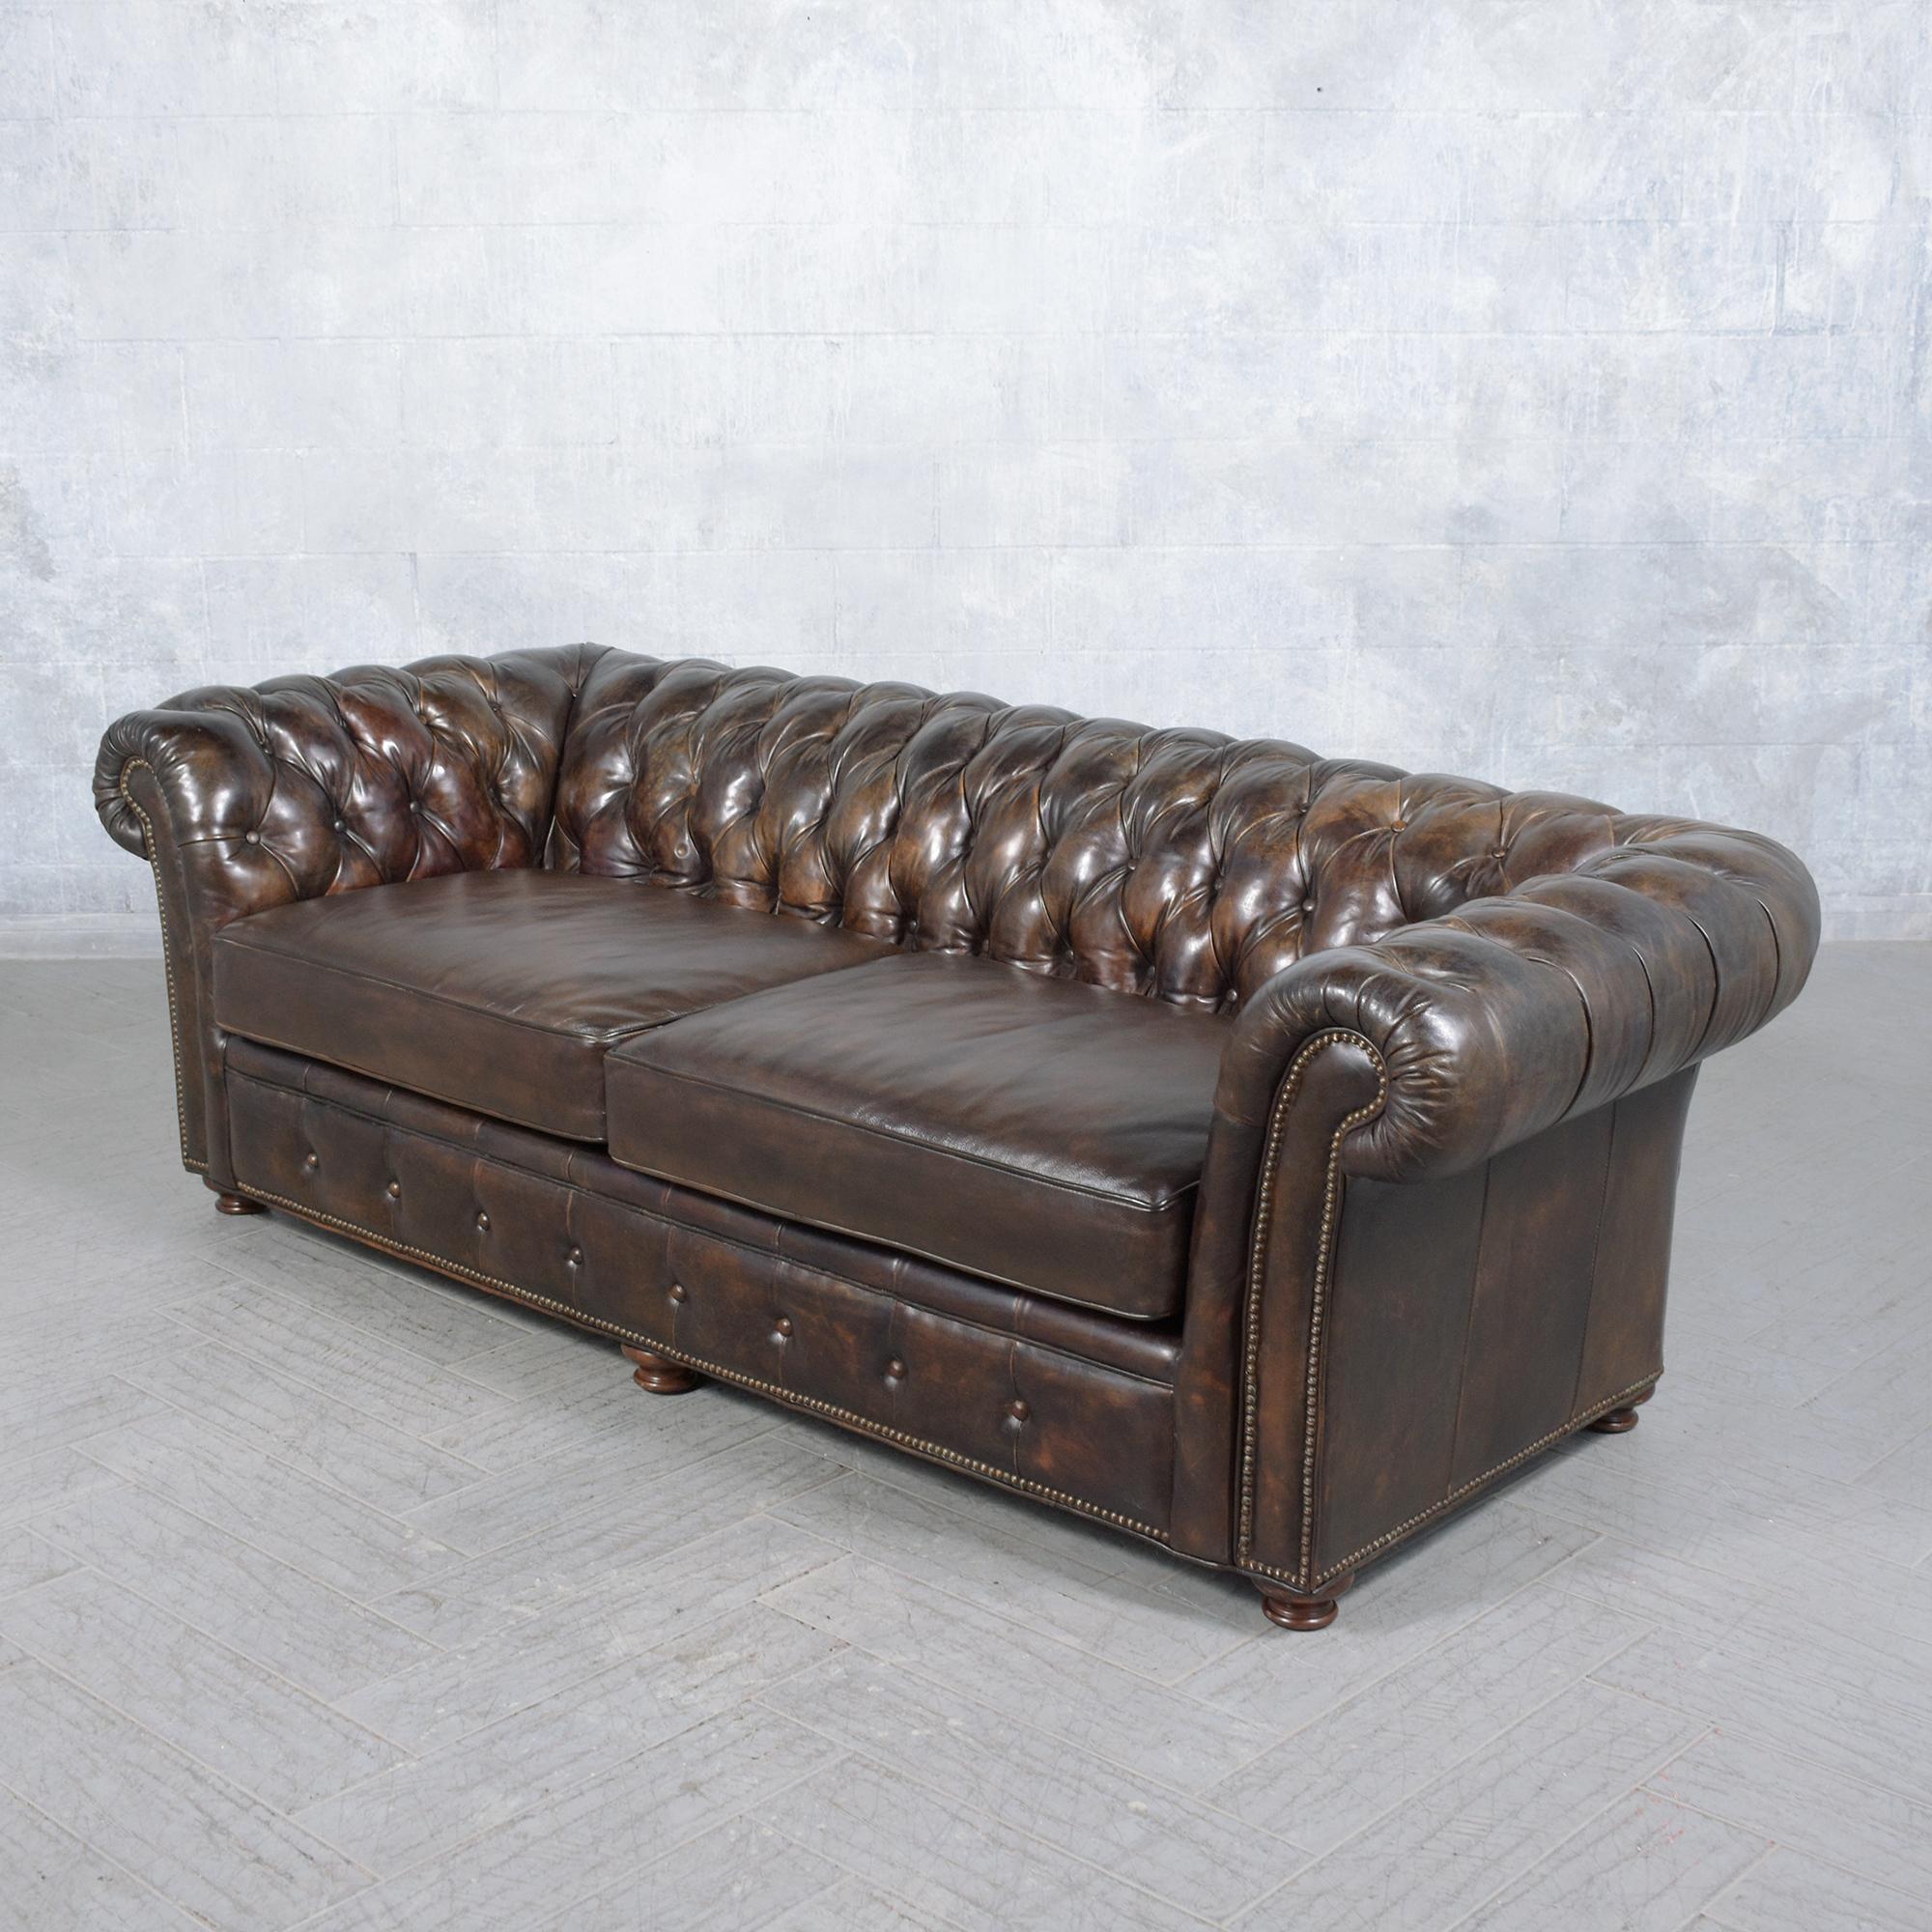 Late 20th Century 1970s Vintage Chesterfield Sofa: Brown Leather Elegance